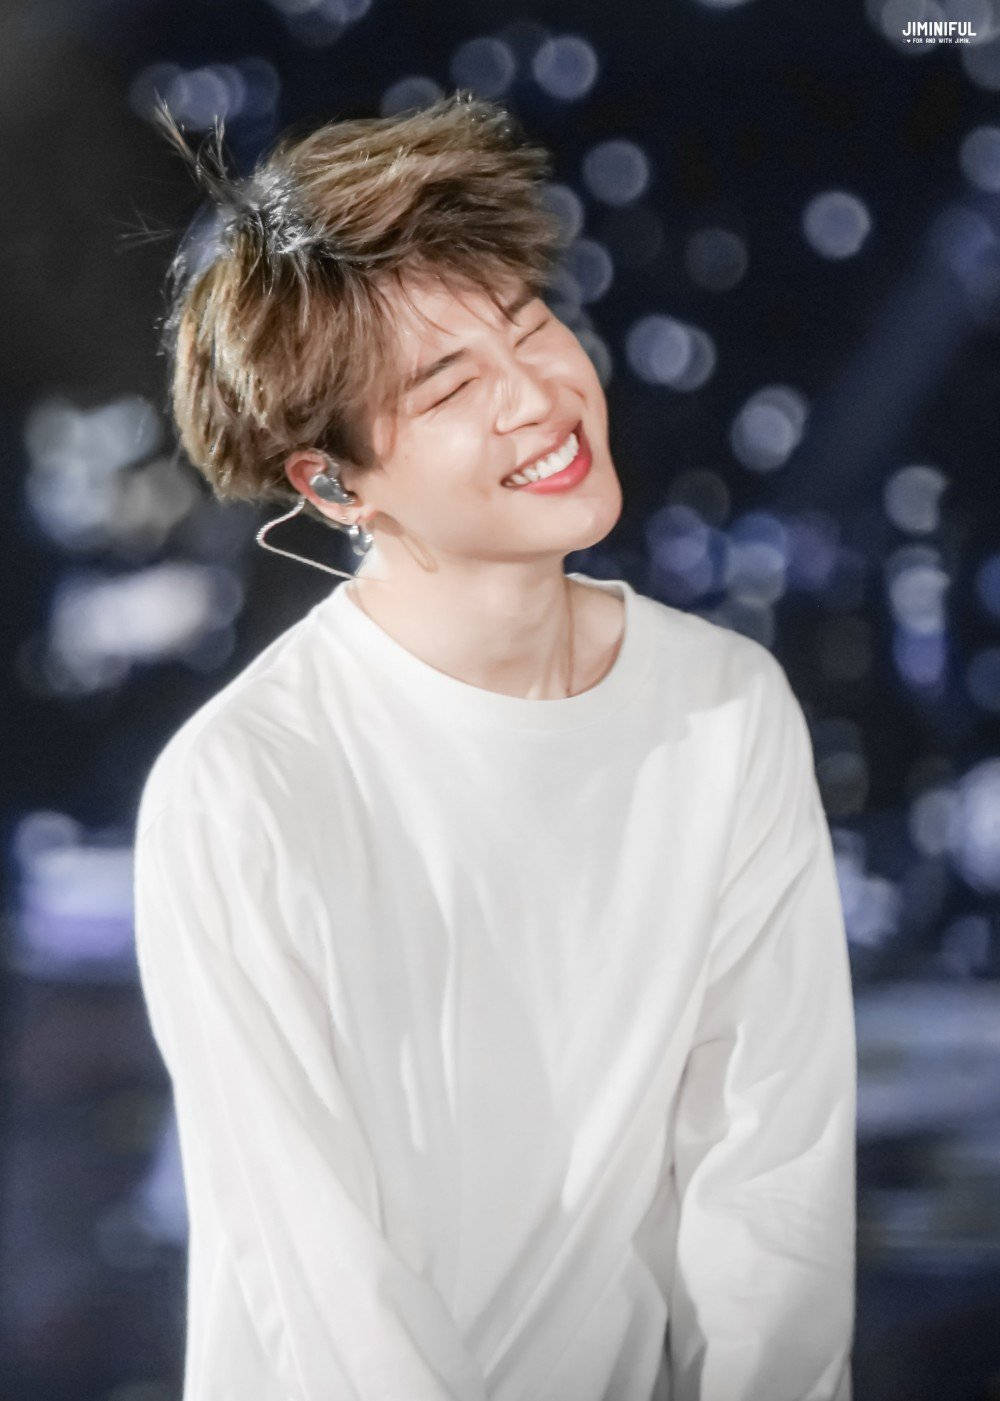 Jimin Of Bts Smiles At His Fans Onstage Background